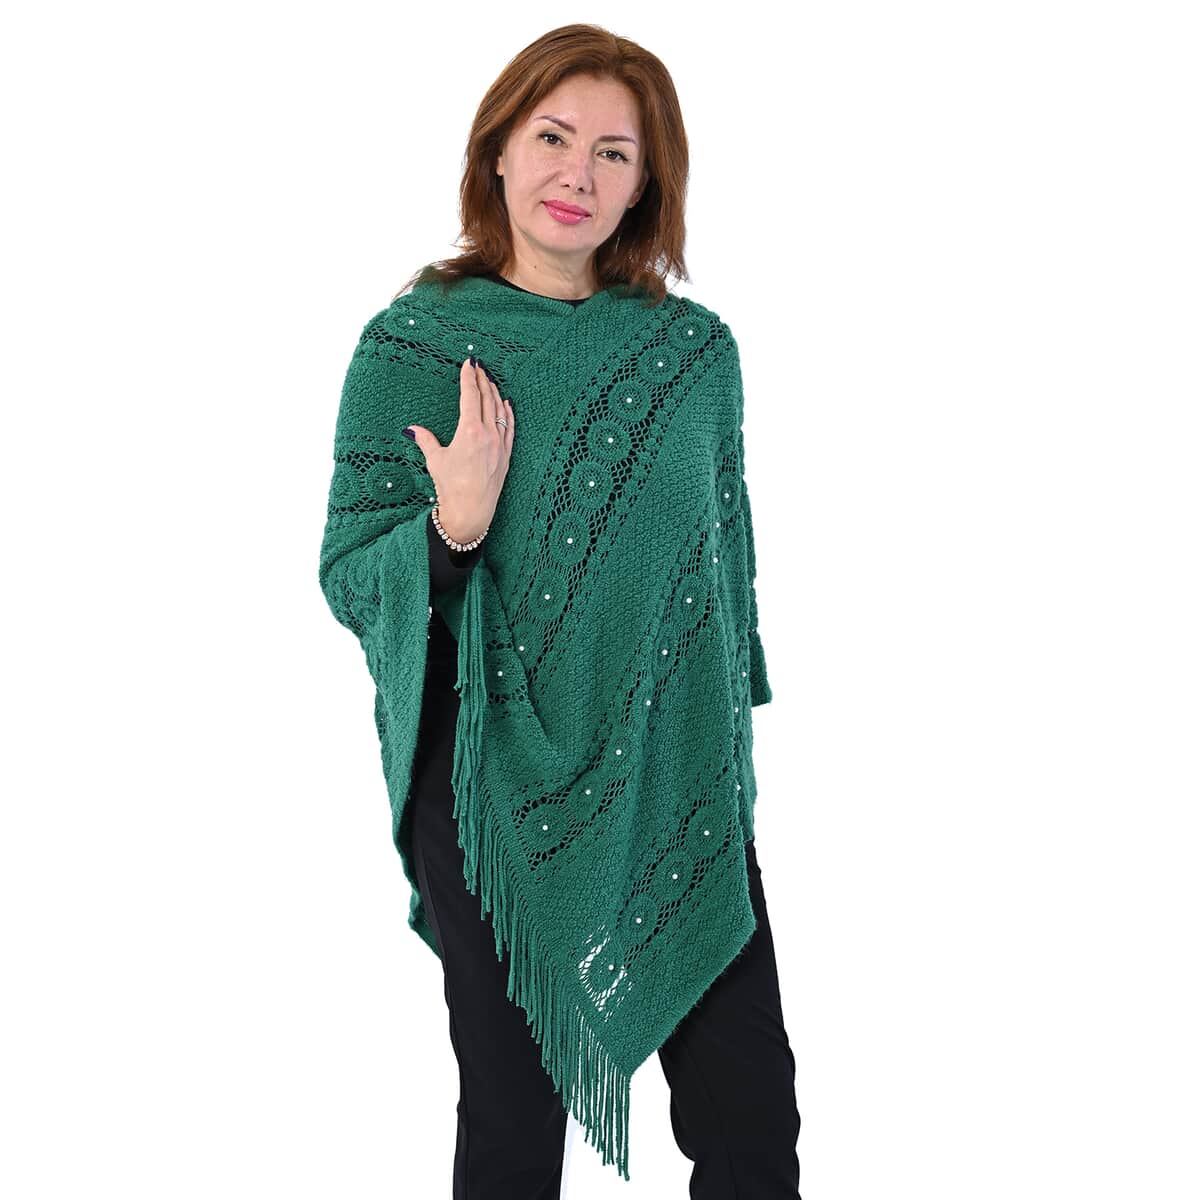 Green Diamond-Shaped Knitted Poncho with Beads (One Size Fits Most) image number 4